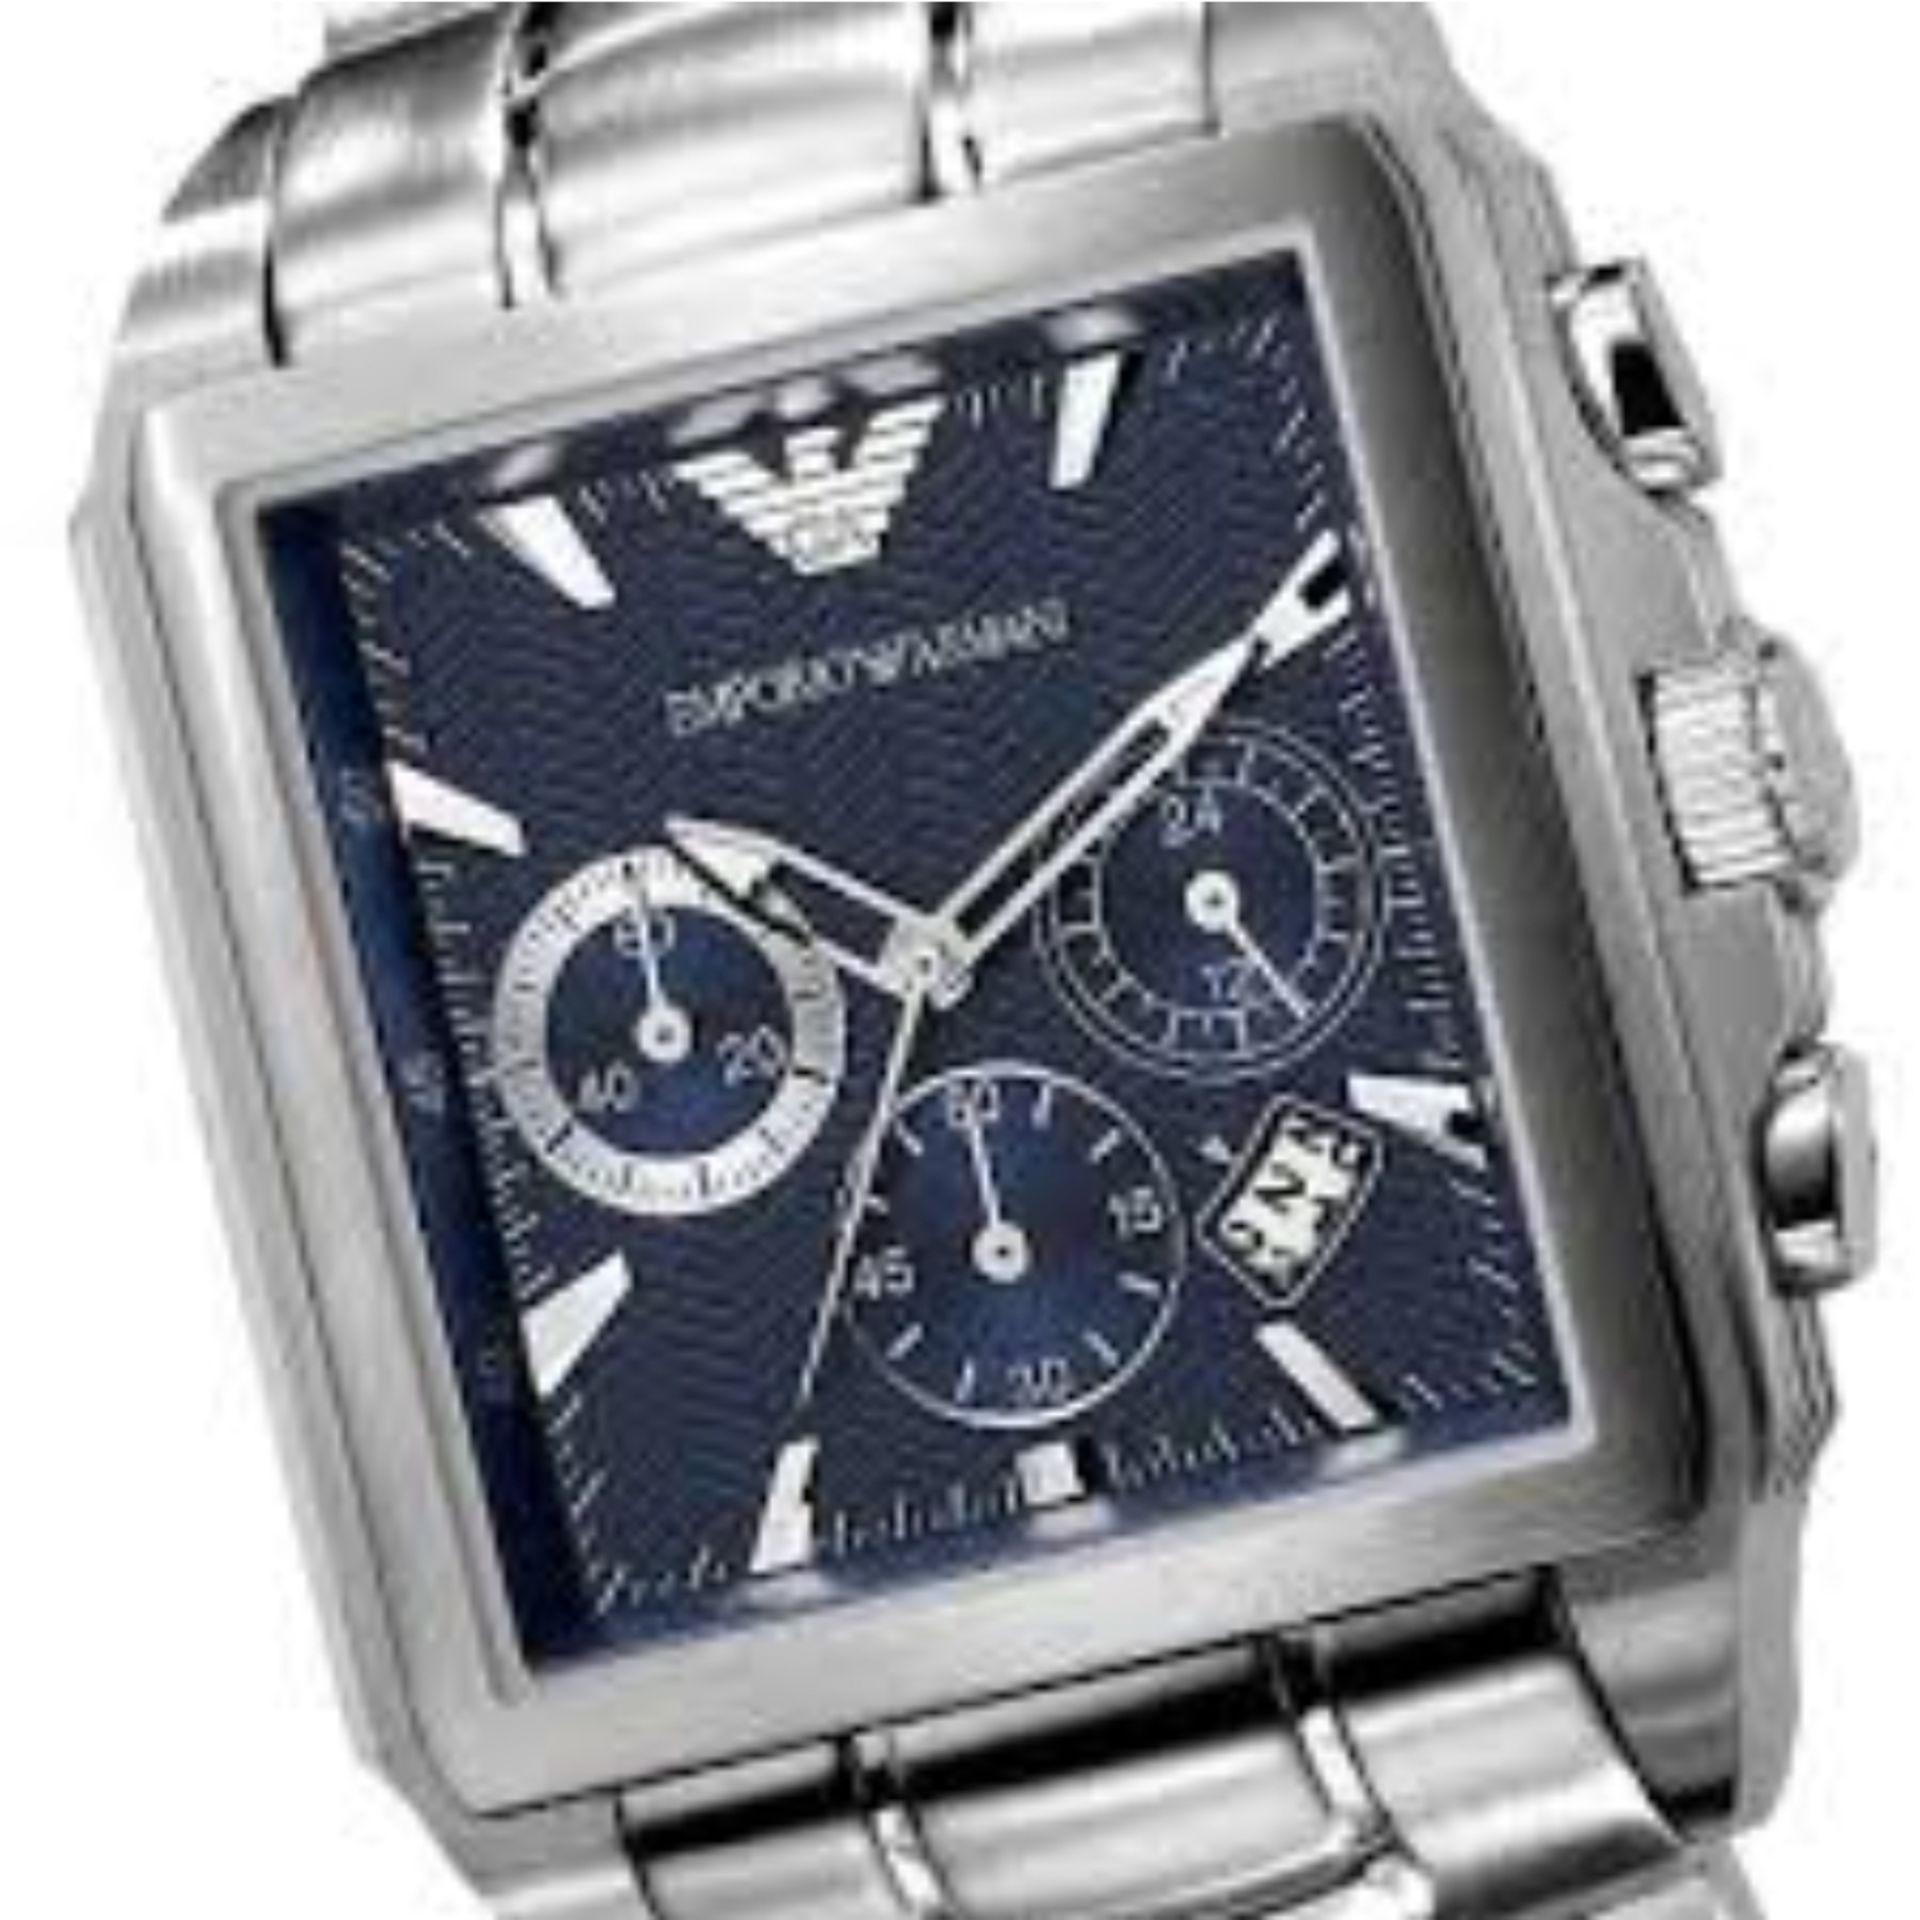 Emporio Armani AR0660 Men's Square Dial Silver Stainless Steel Bracelet Chronograph Watch - Image 2 of 5